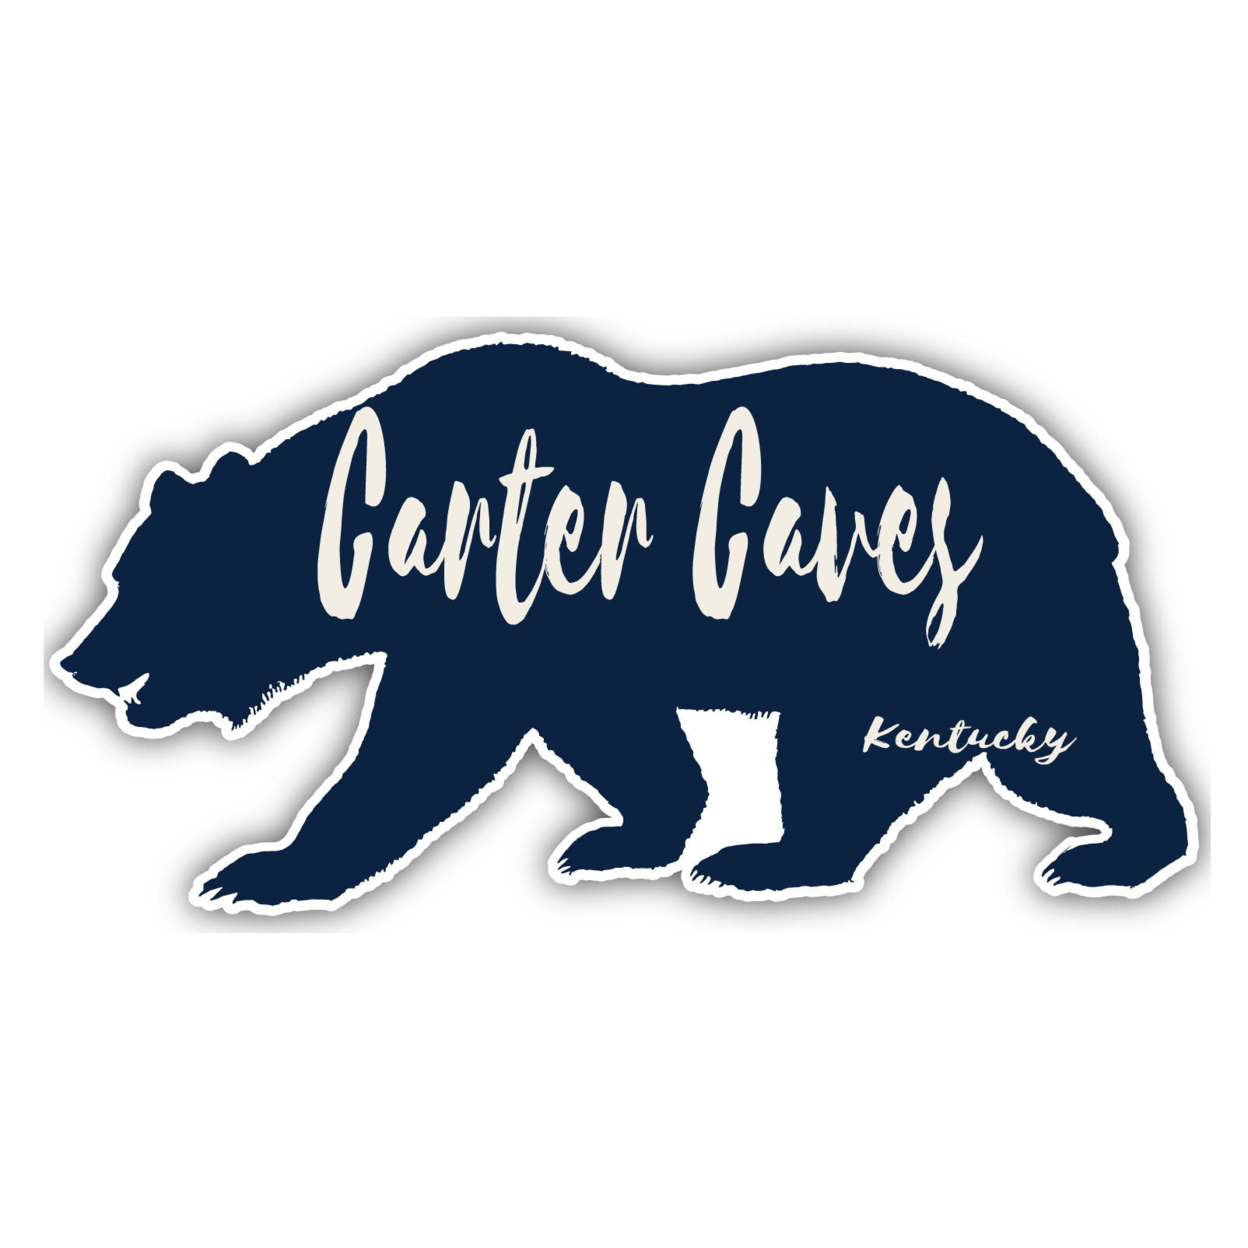 Carter Caves Kentucky Souvenir Decorative Stickers (Choose Theme And Size) - 4-Pack, 10-Inch, Bear